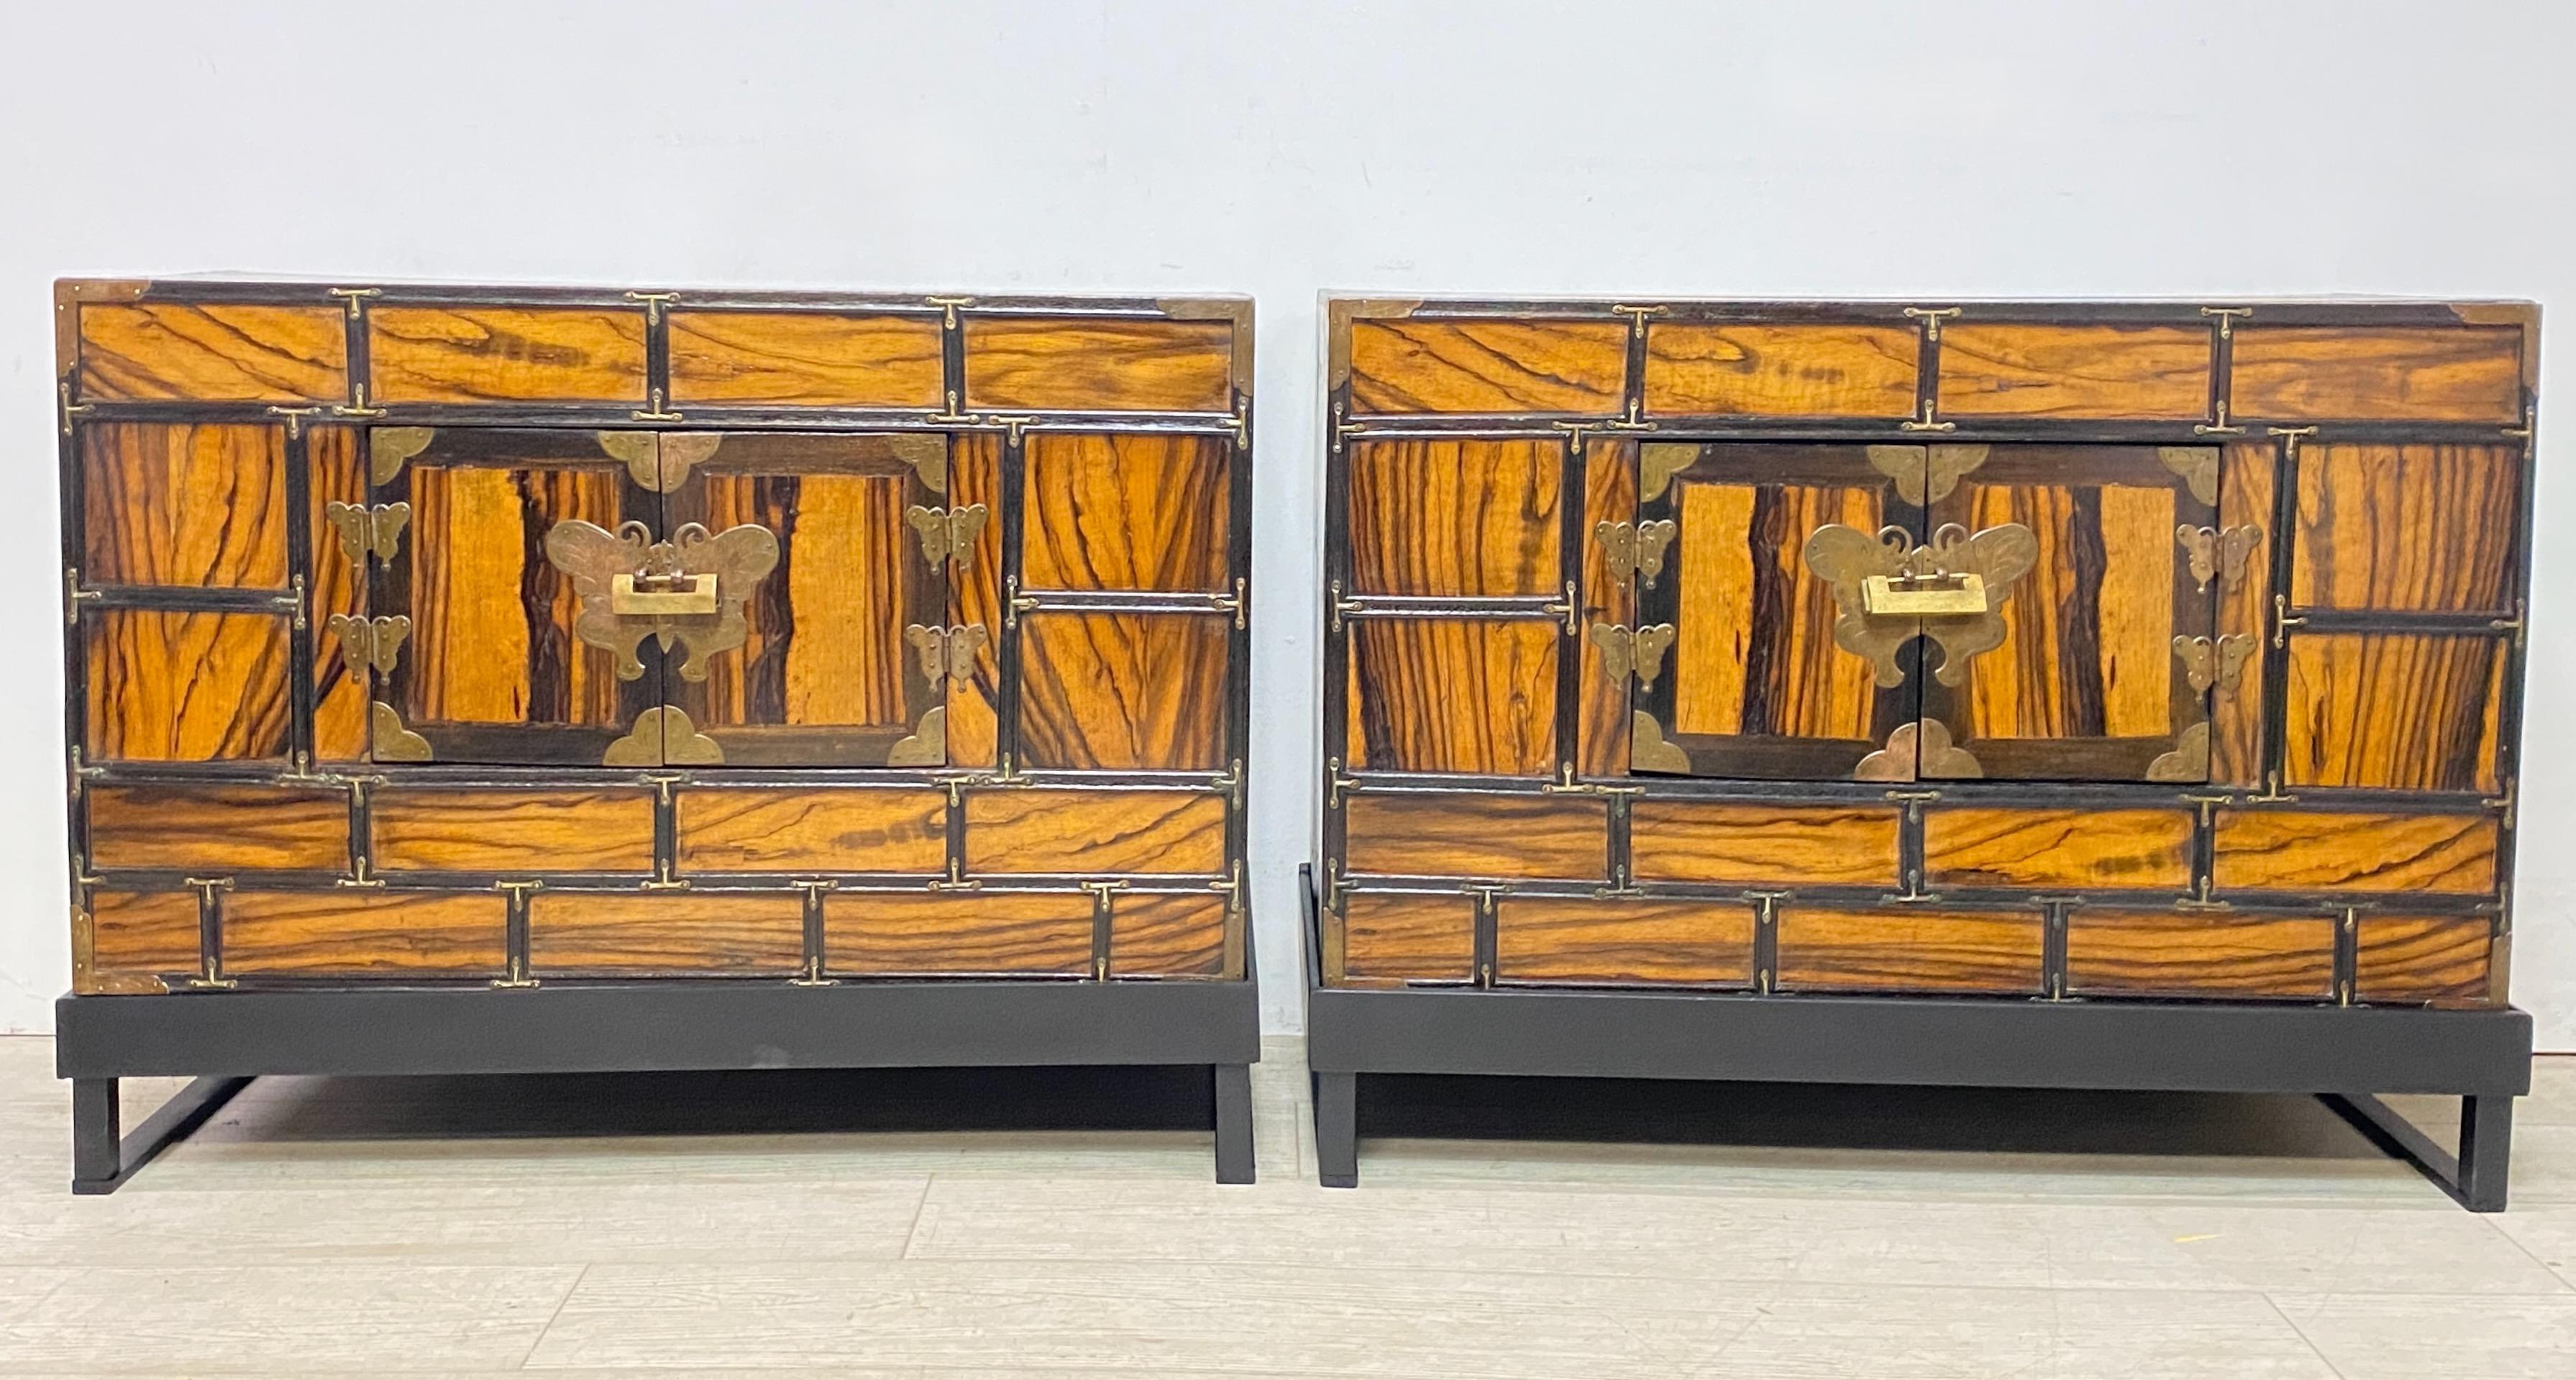 A pair of unusual Persimmon wood veneer over Pine bedside cabinets / tables on recent custom made bases. Original paper lined interior with sold brass hardware and fittings. 
Early 20th century (possibly older).
Thailand
Clean and in very good